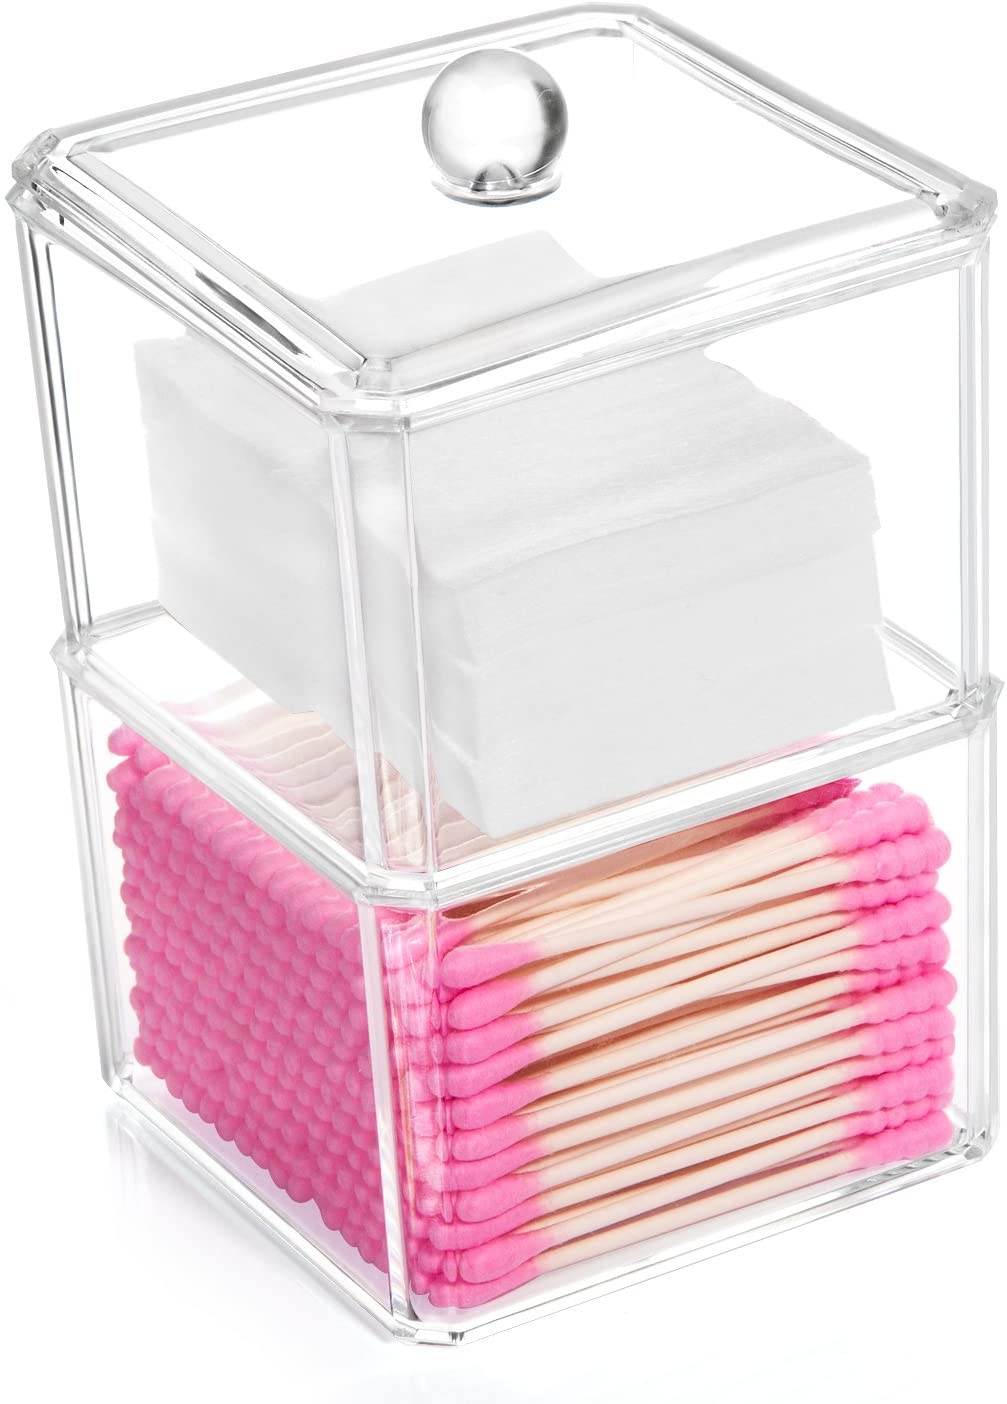 Clear Storage Boxes Separate Qtips Holder, Swabs Pads Dispenser, Clear Wall  Mounted Makeup Ball Organizers and Storage Box Containers for Swab, Floss,  Hairpin, Clip